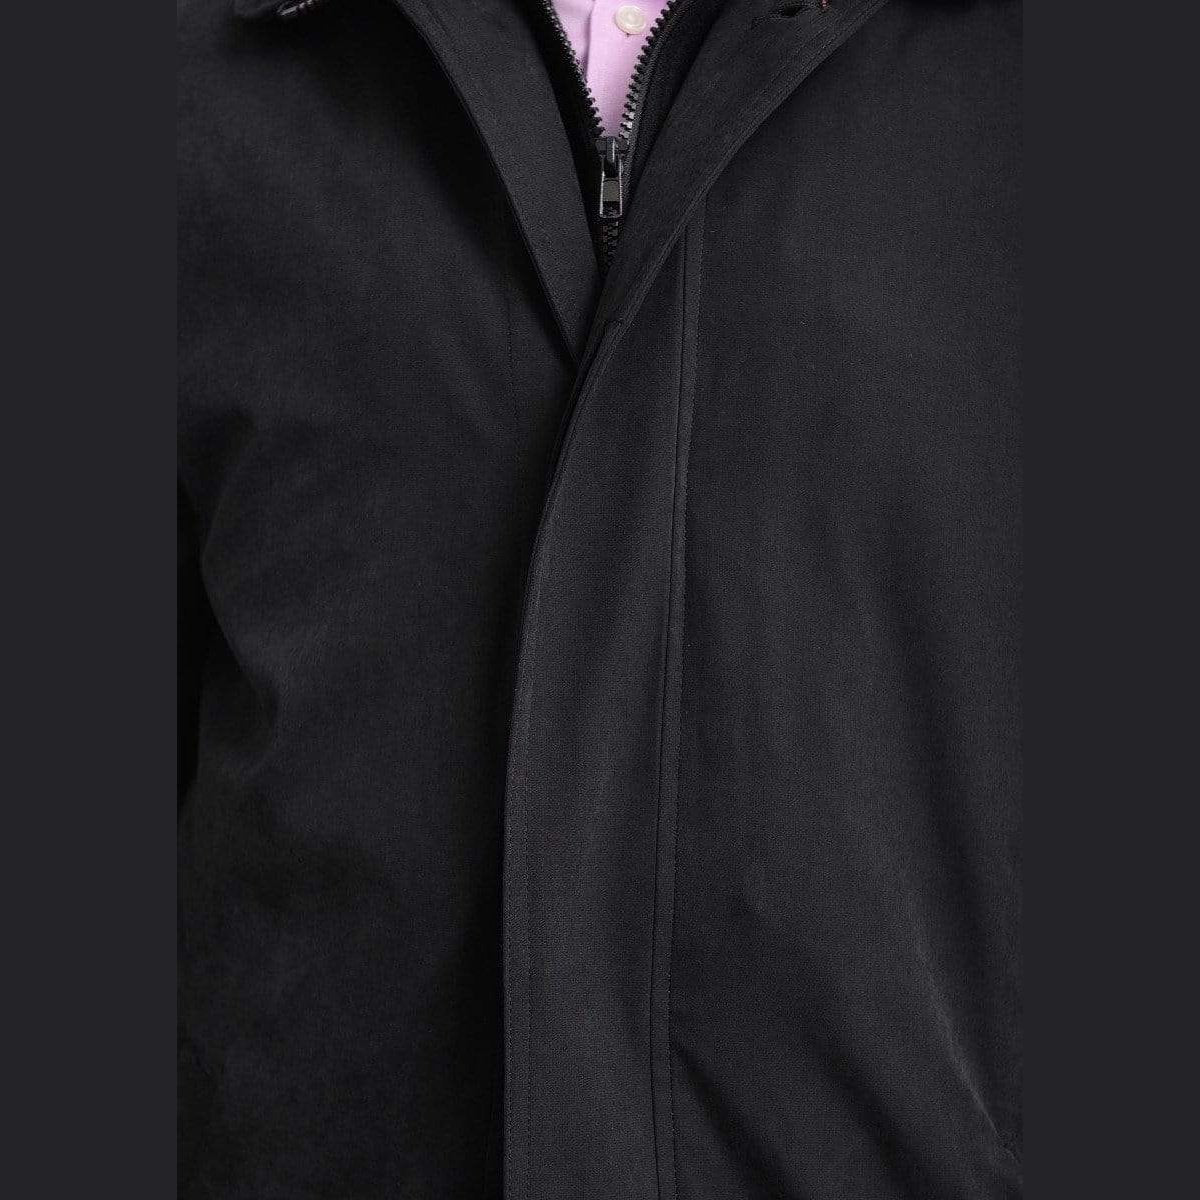 Cianni Cellini Dress Coats Men&#39;s Rain-proof Iconic Black Trench Coat Jacket With Removable Liner